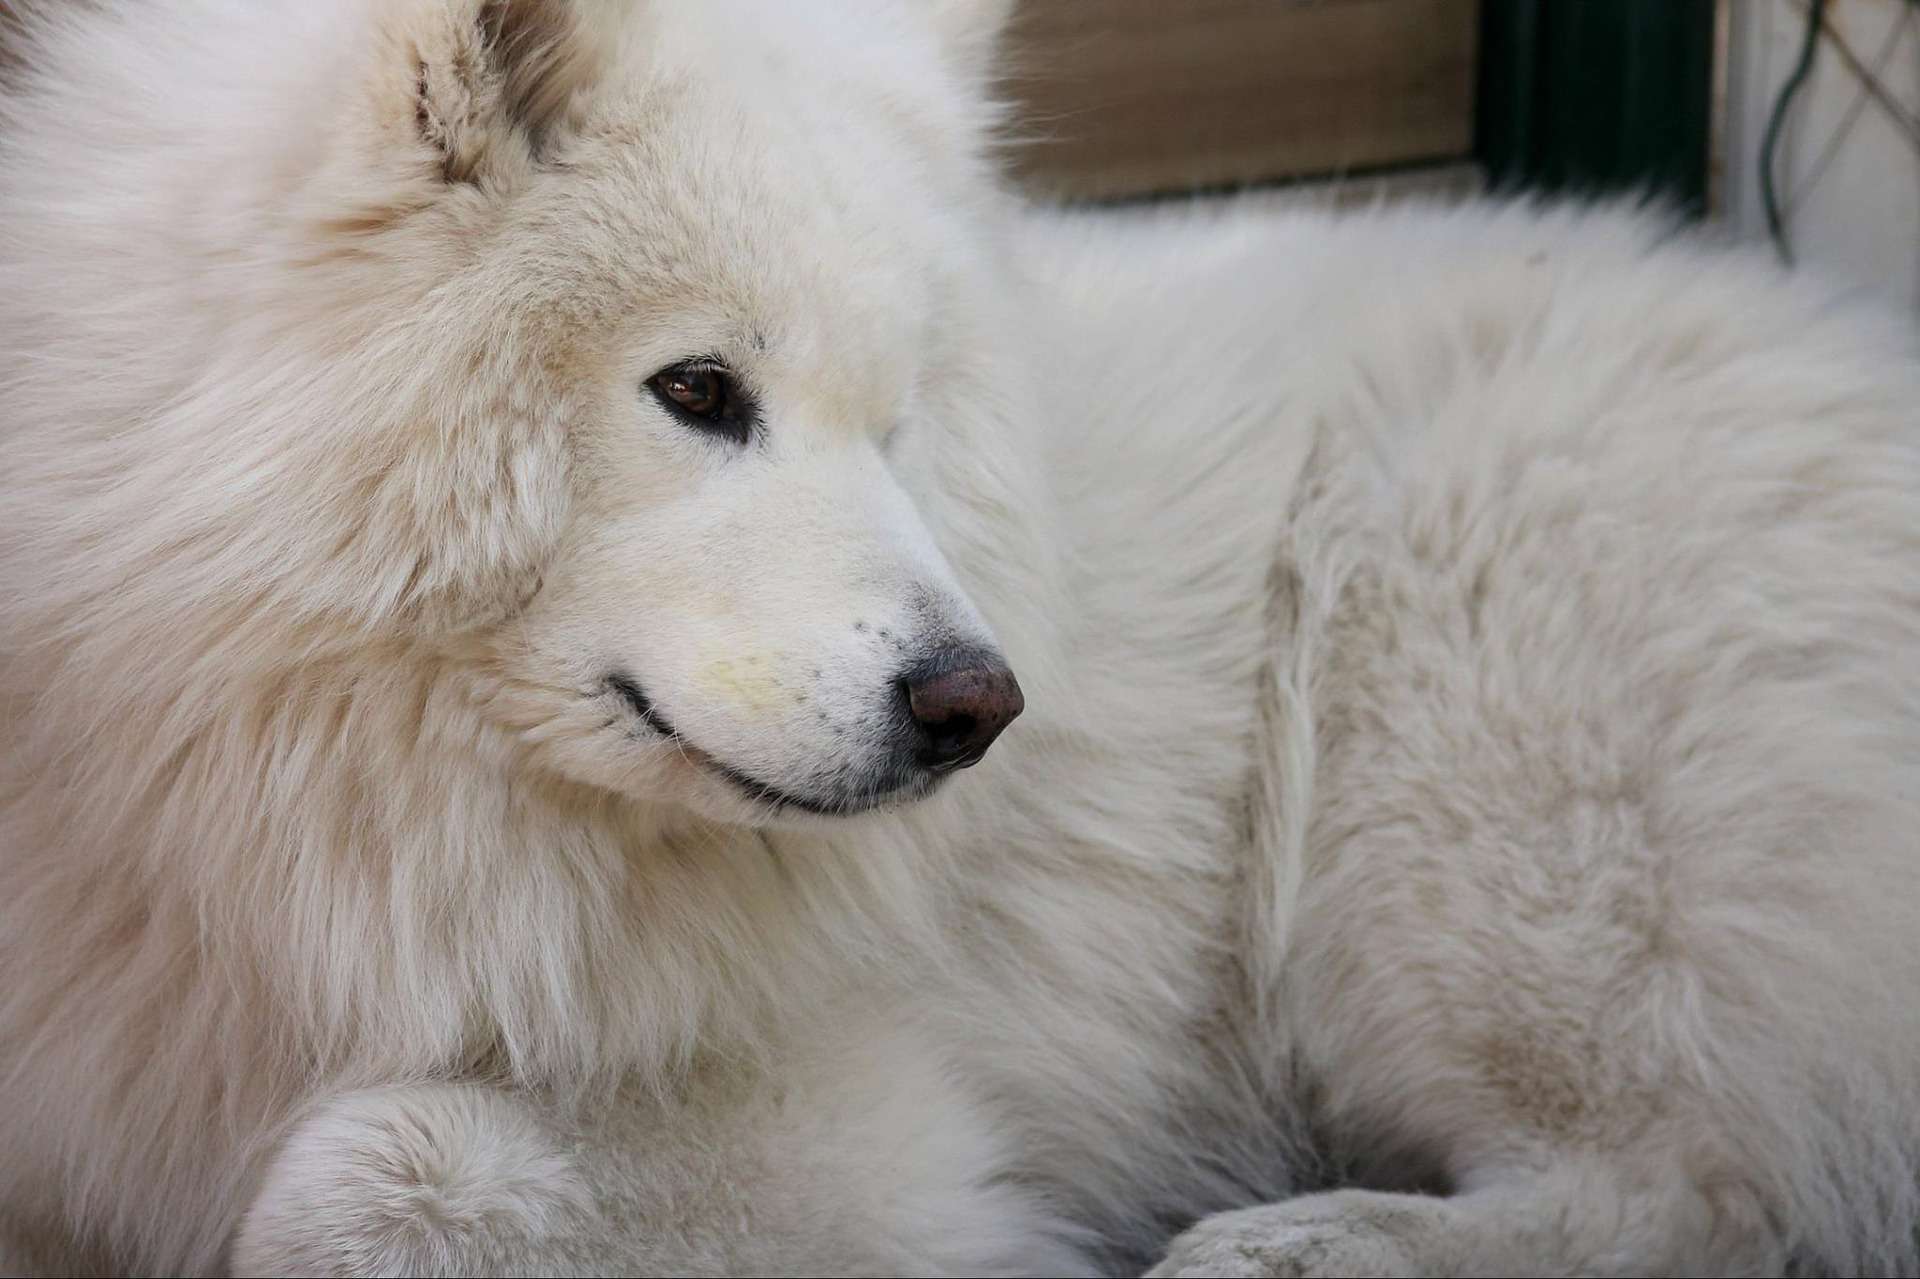 A Samoyed with a beautiful coat.